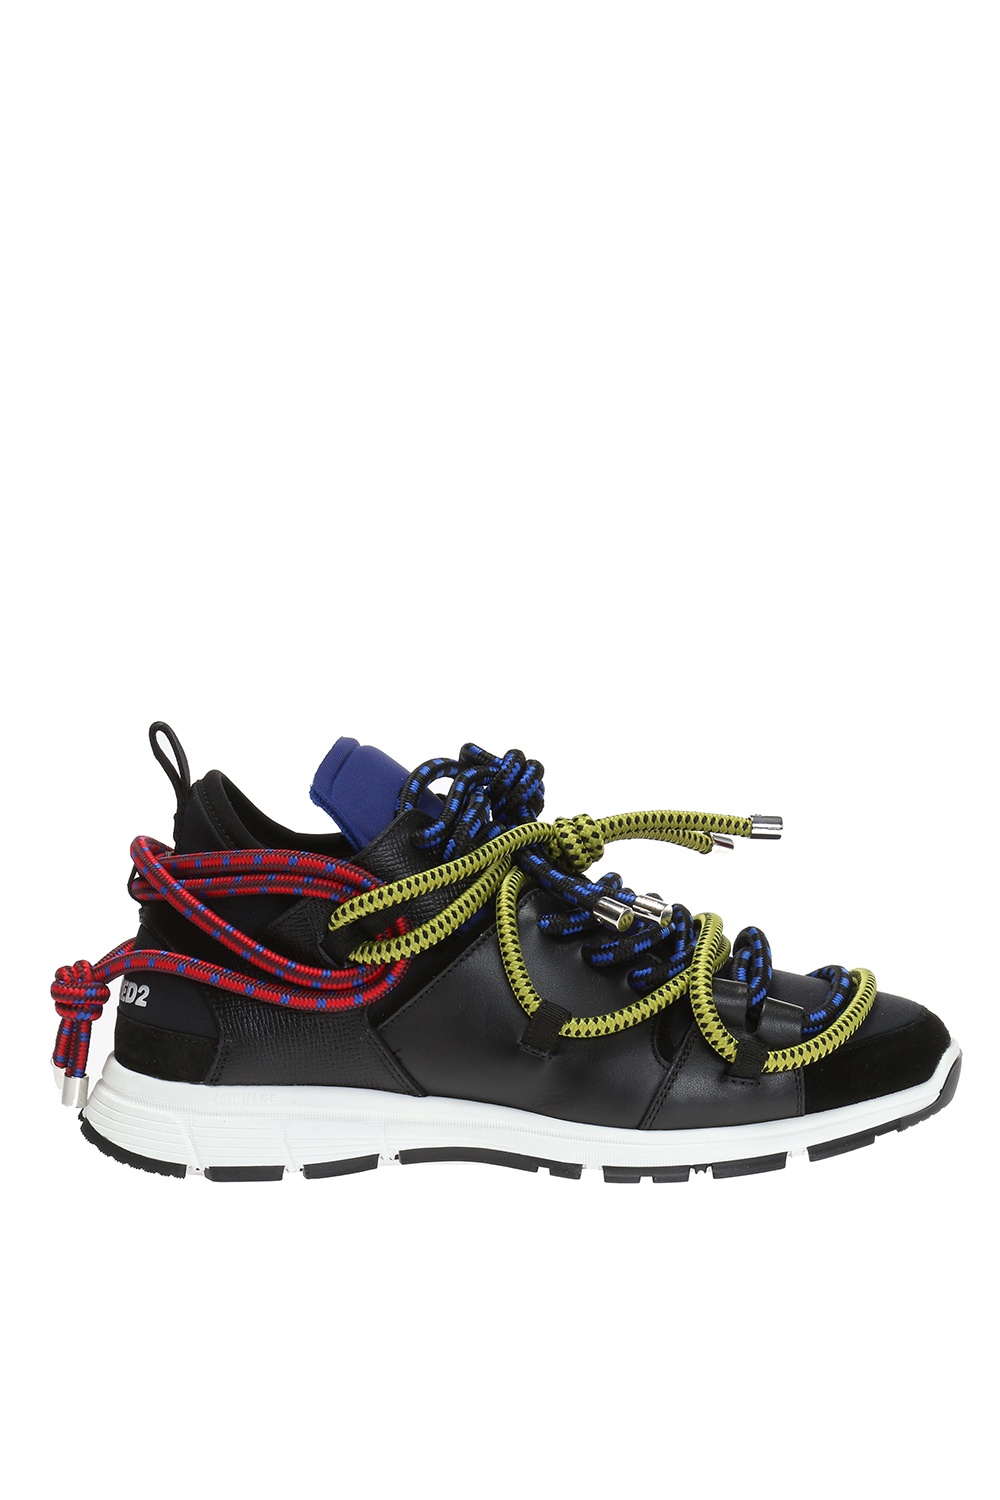 dsquared2 bungy jump sneakers